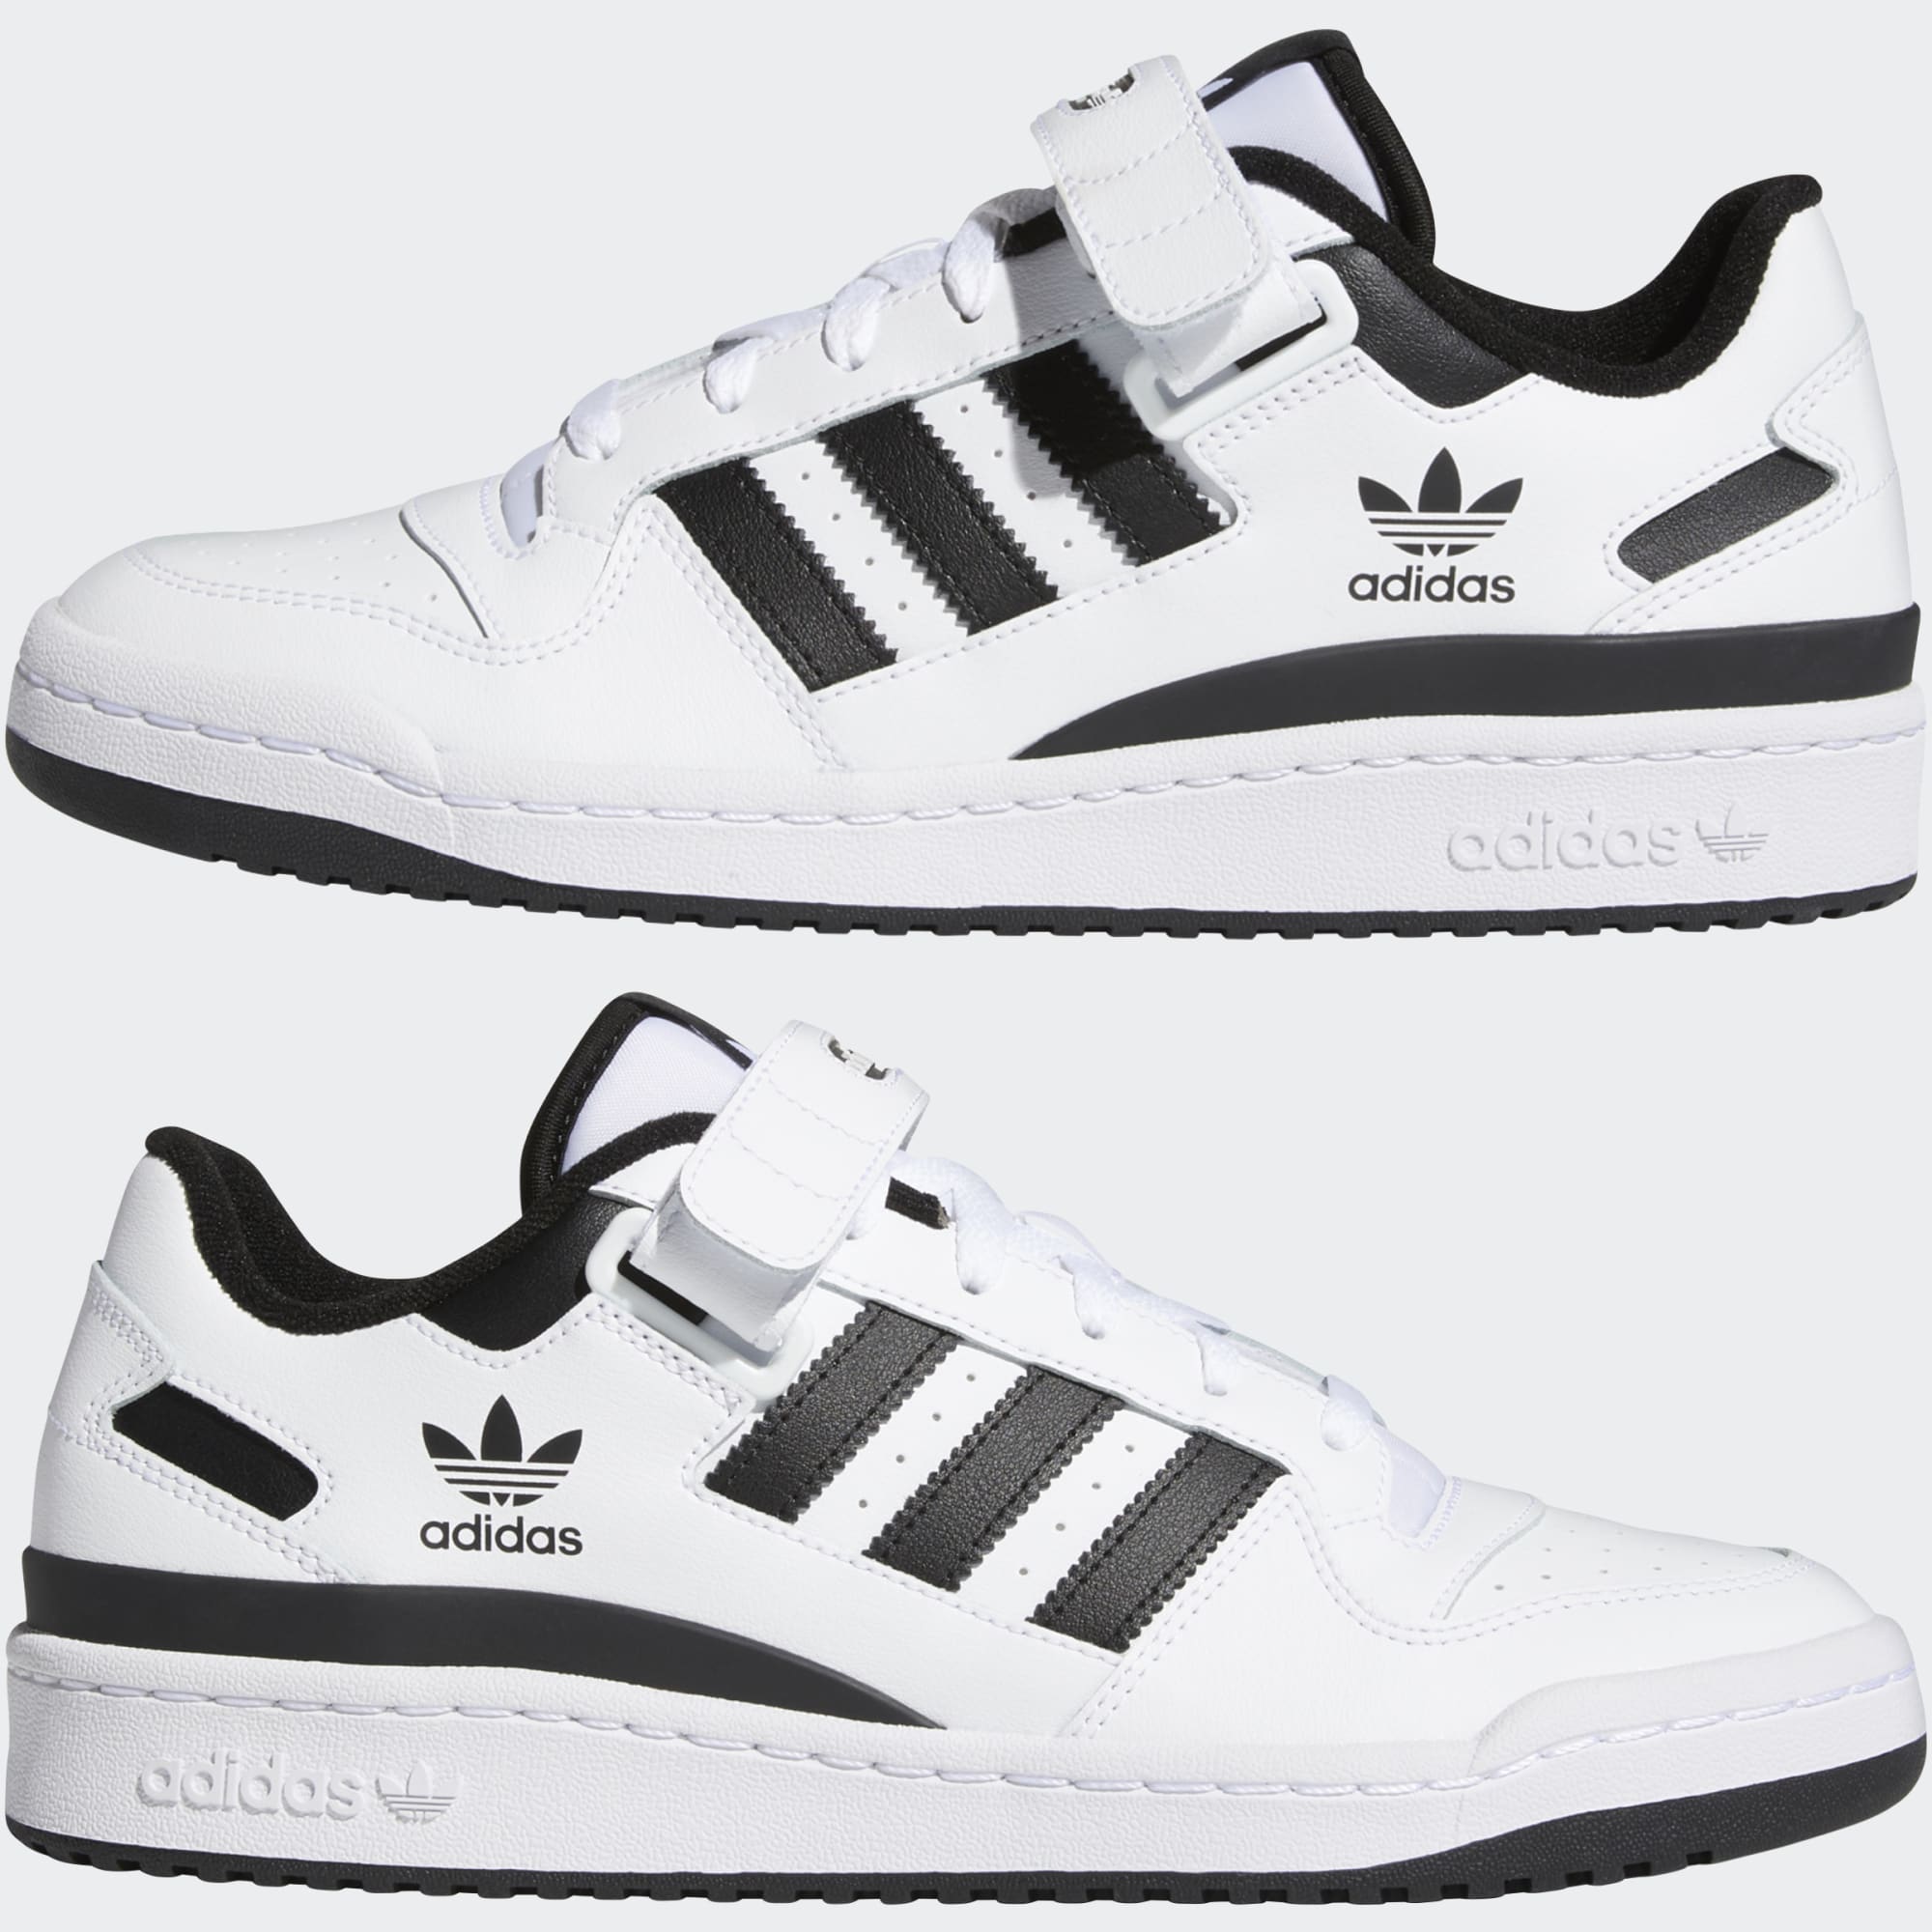 adidas Men's Forum Low Shoes (2 colors, size 10.5-) $35 + Free Shipping